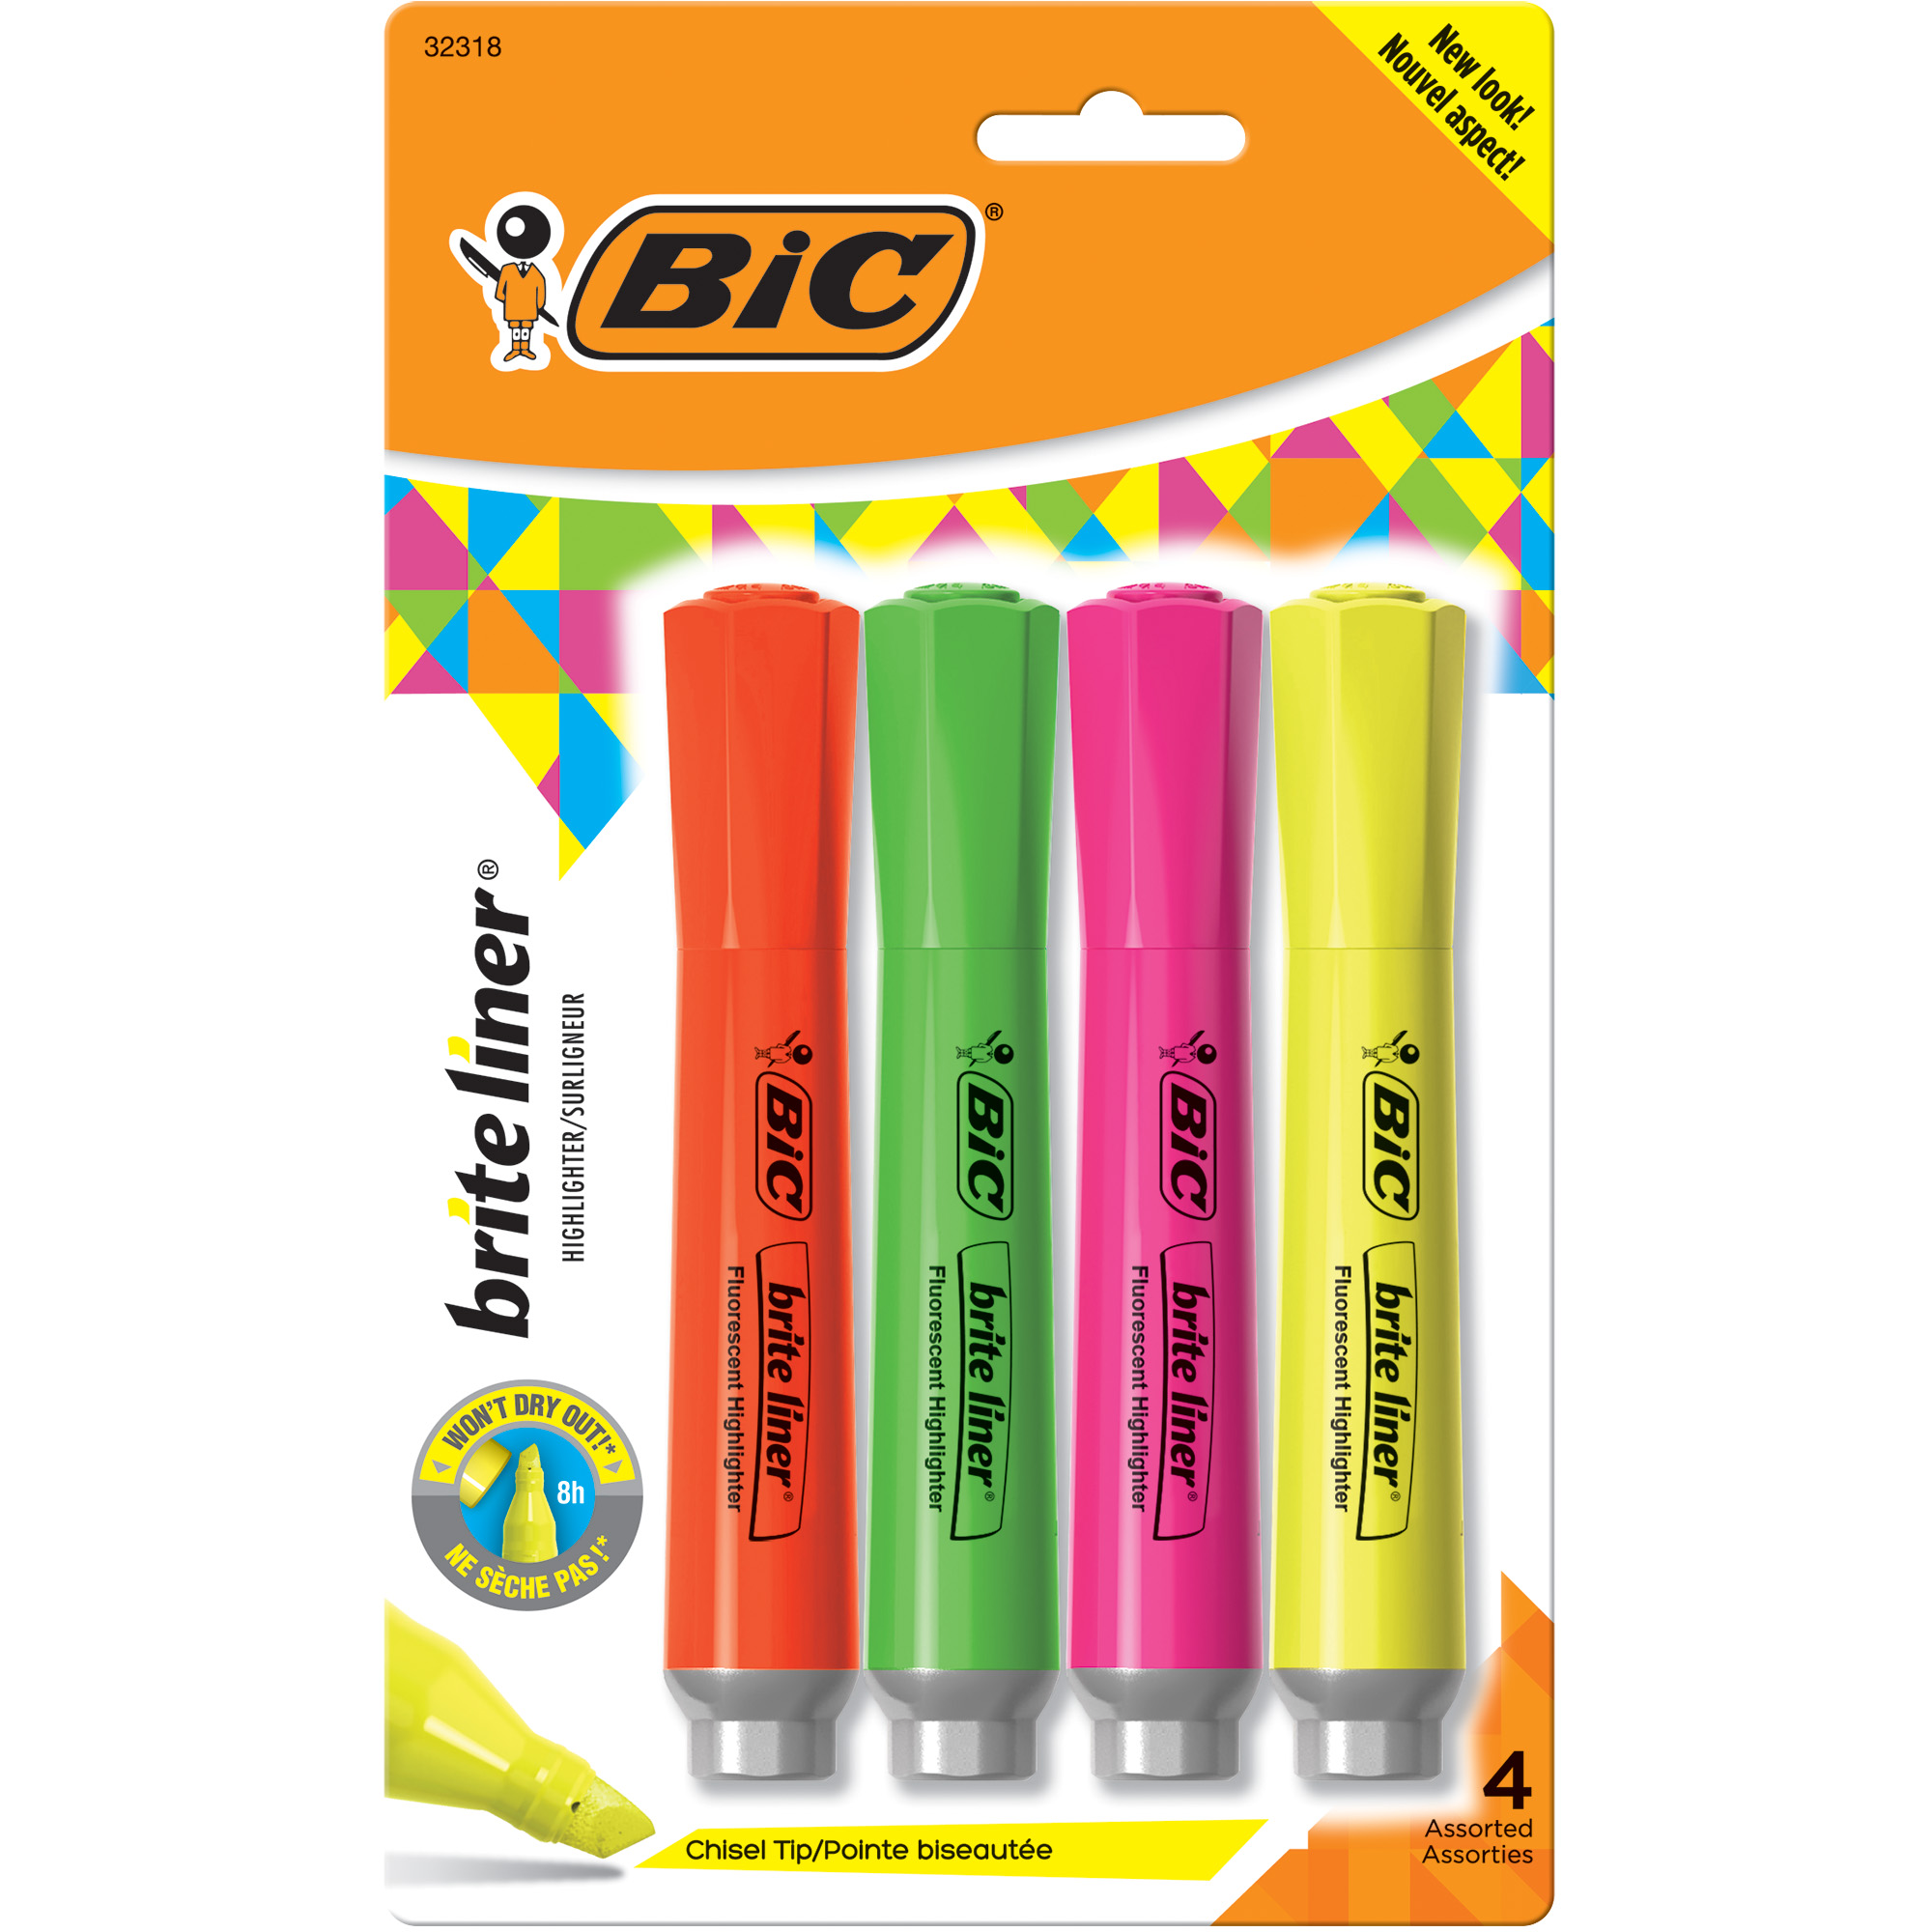 BIC Brite Liner Grip XL Highlighters, Chisel Tip, Assorted Colors, Pack of 4 - image 1 of 8